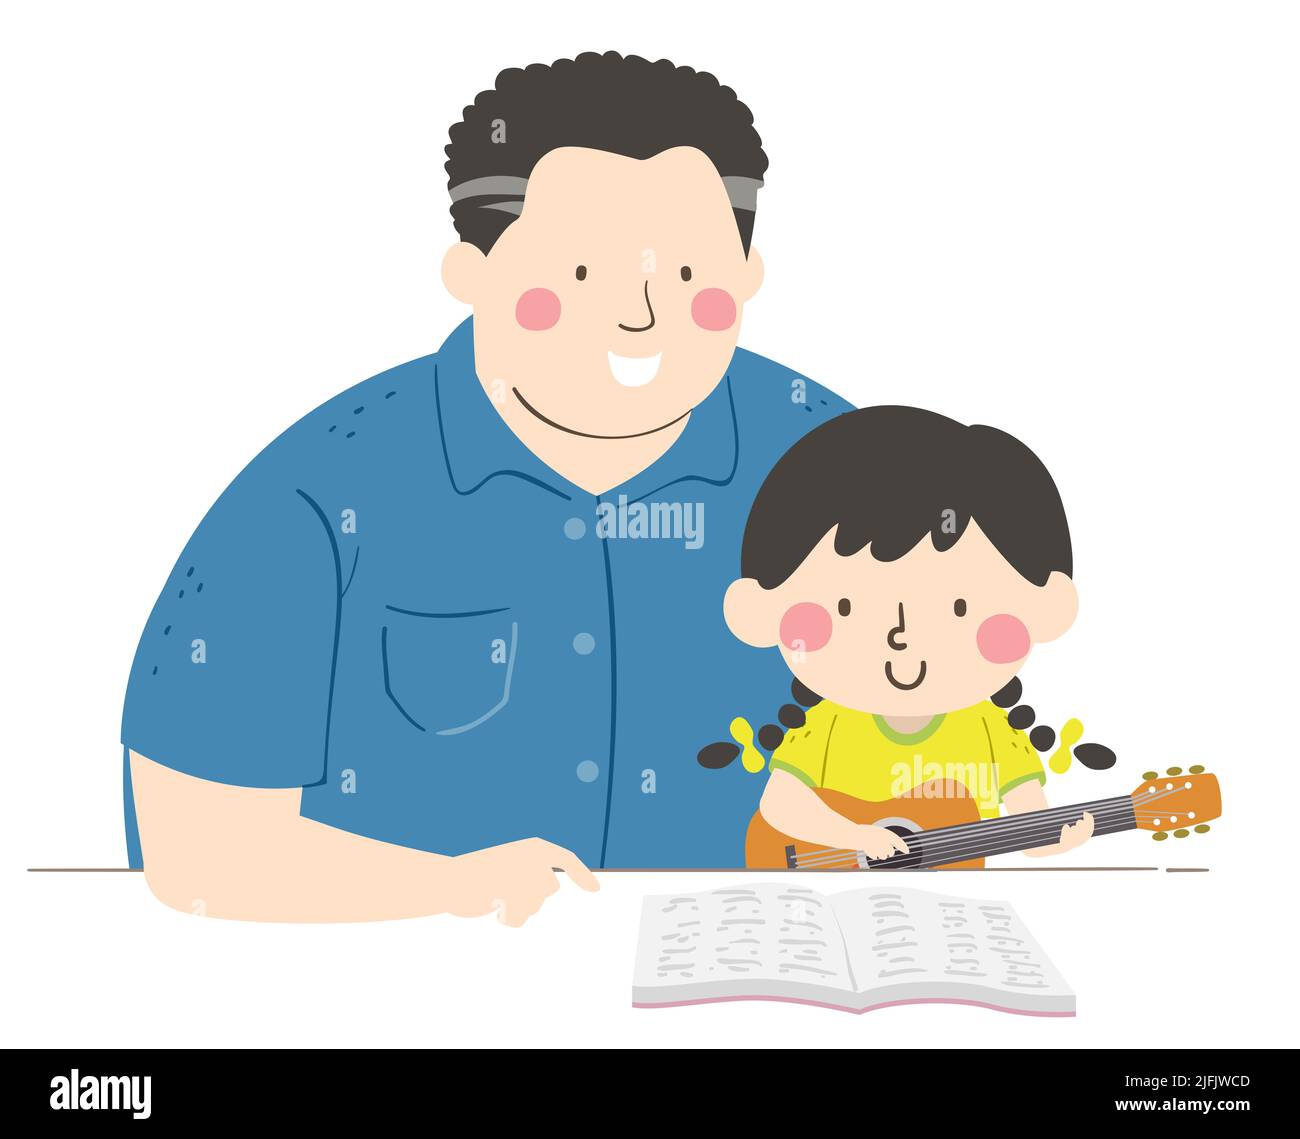 Illustration of Kid Girl Holding a Guitar with Her Dad Pointing Song Book on the Table. Dad Teaching His Daughter to Play Guitar Stock Photo